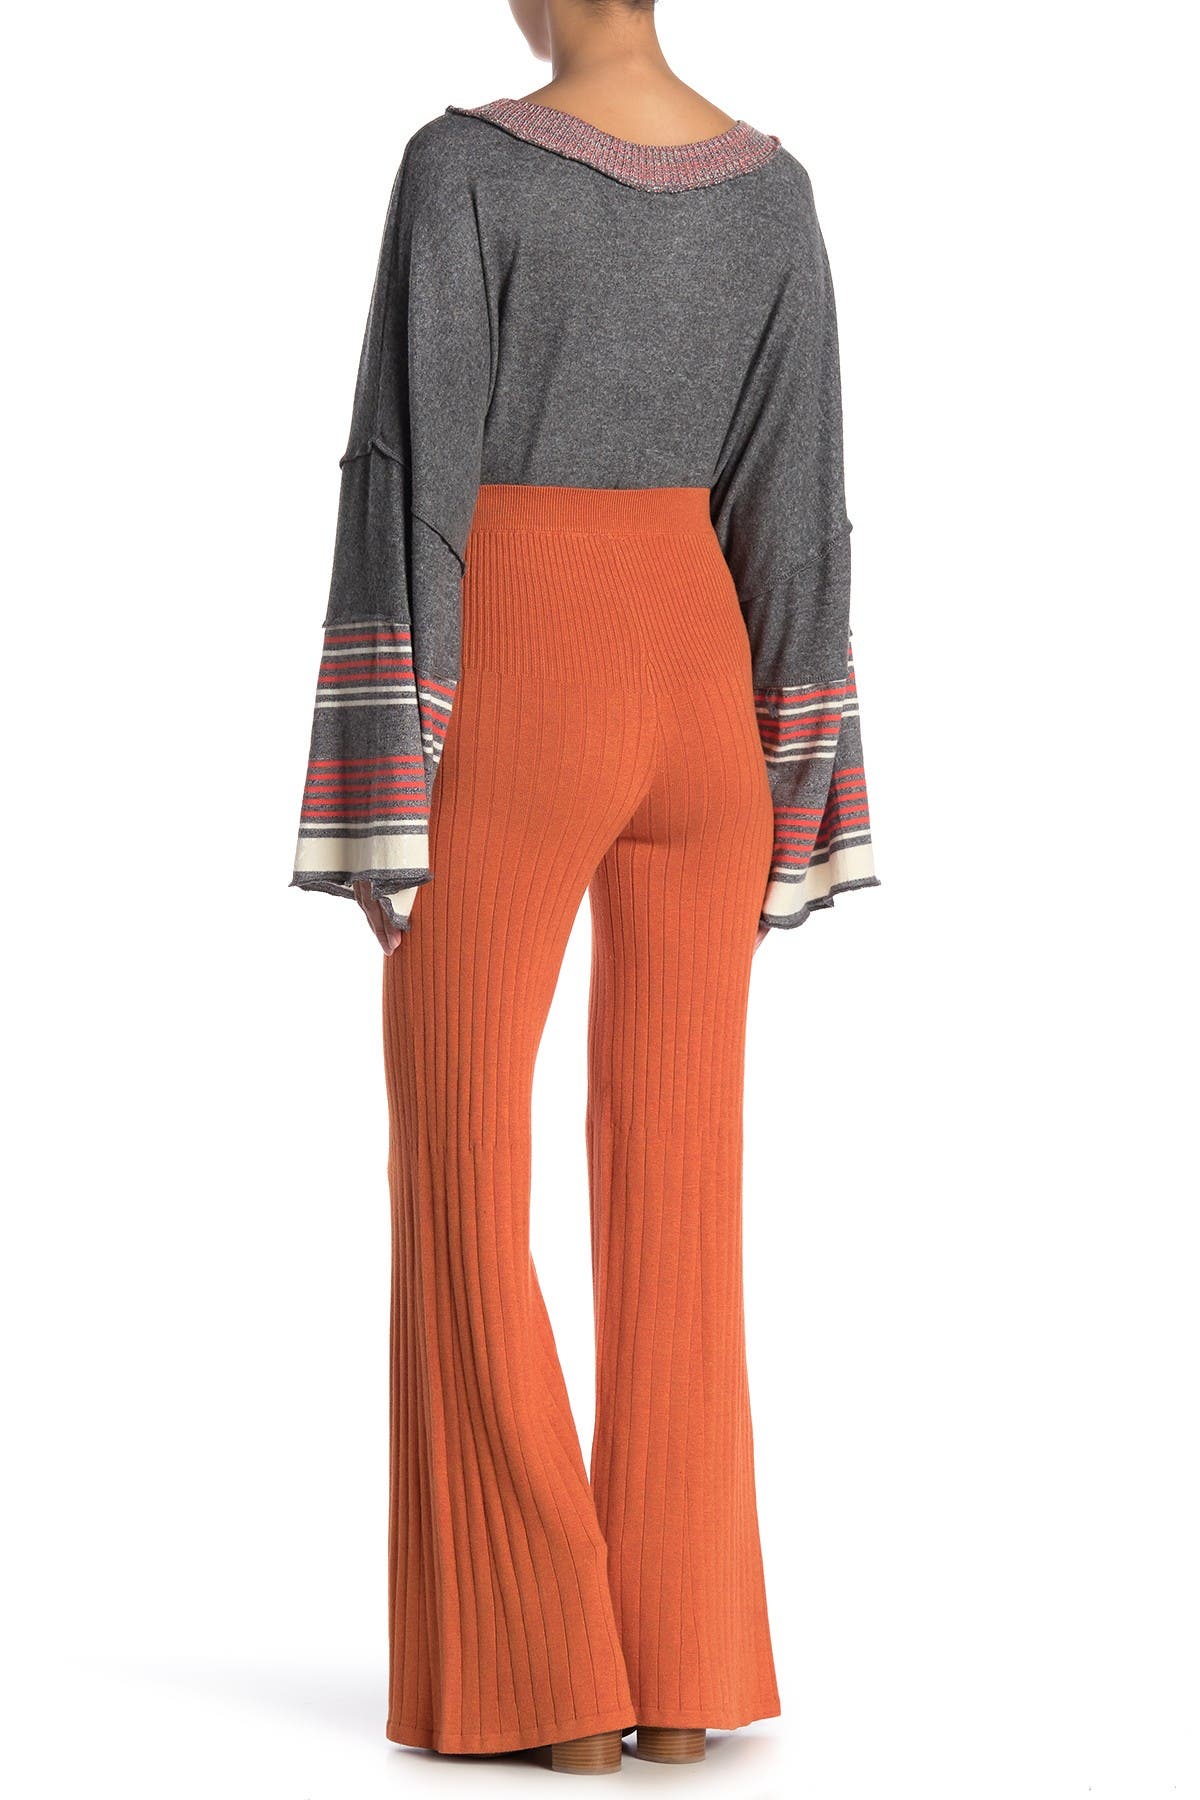 Free People | Keep It Real Flare Ribbed Knit Pants | Nordstrom Rack